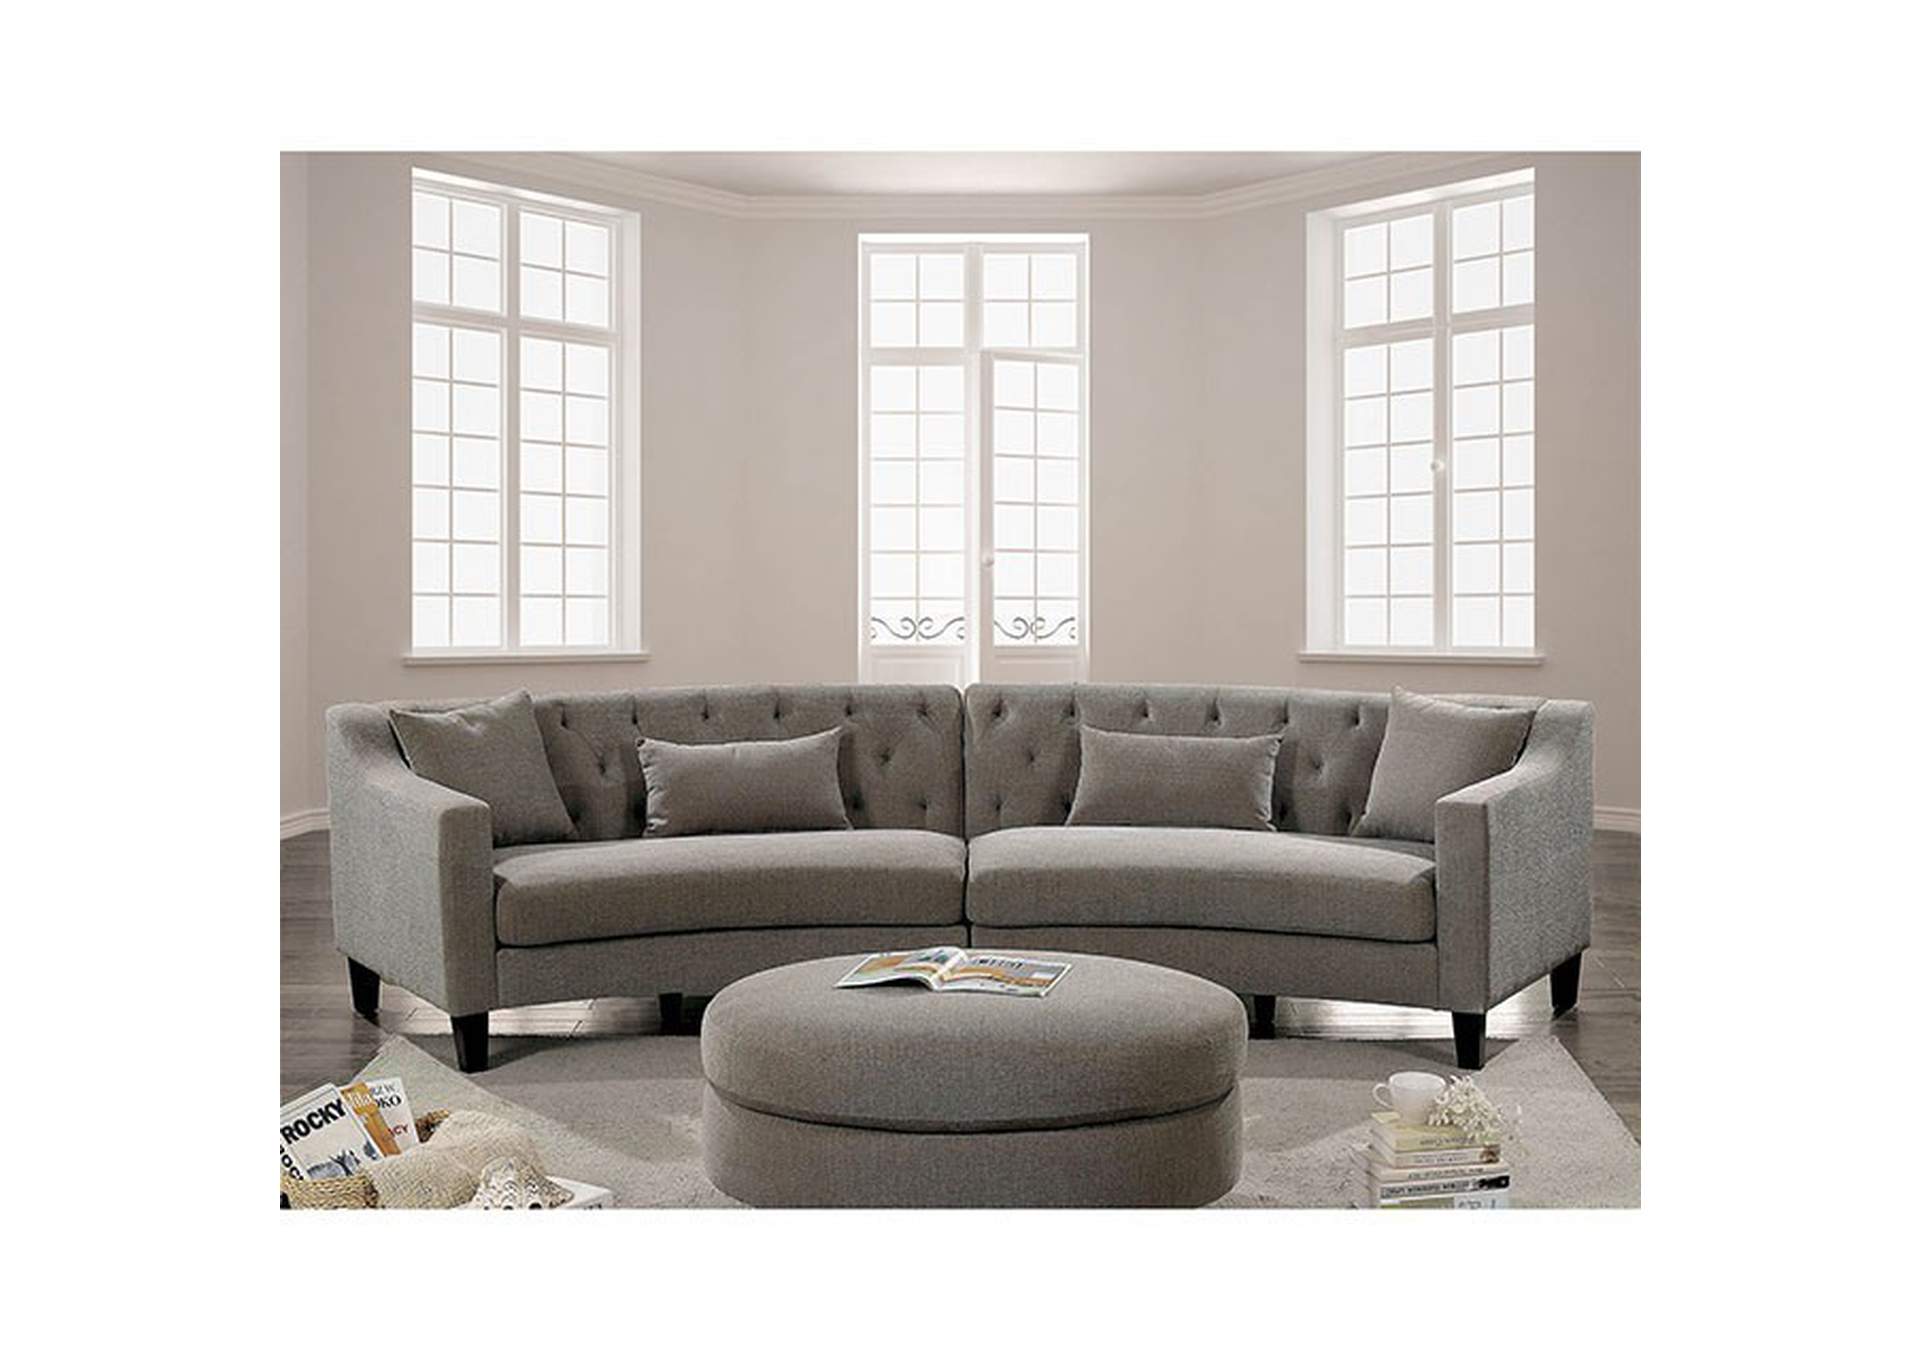 Sarin Warm Gray Sectional,Furniture of America